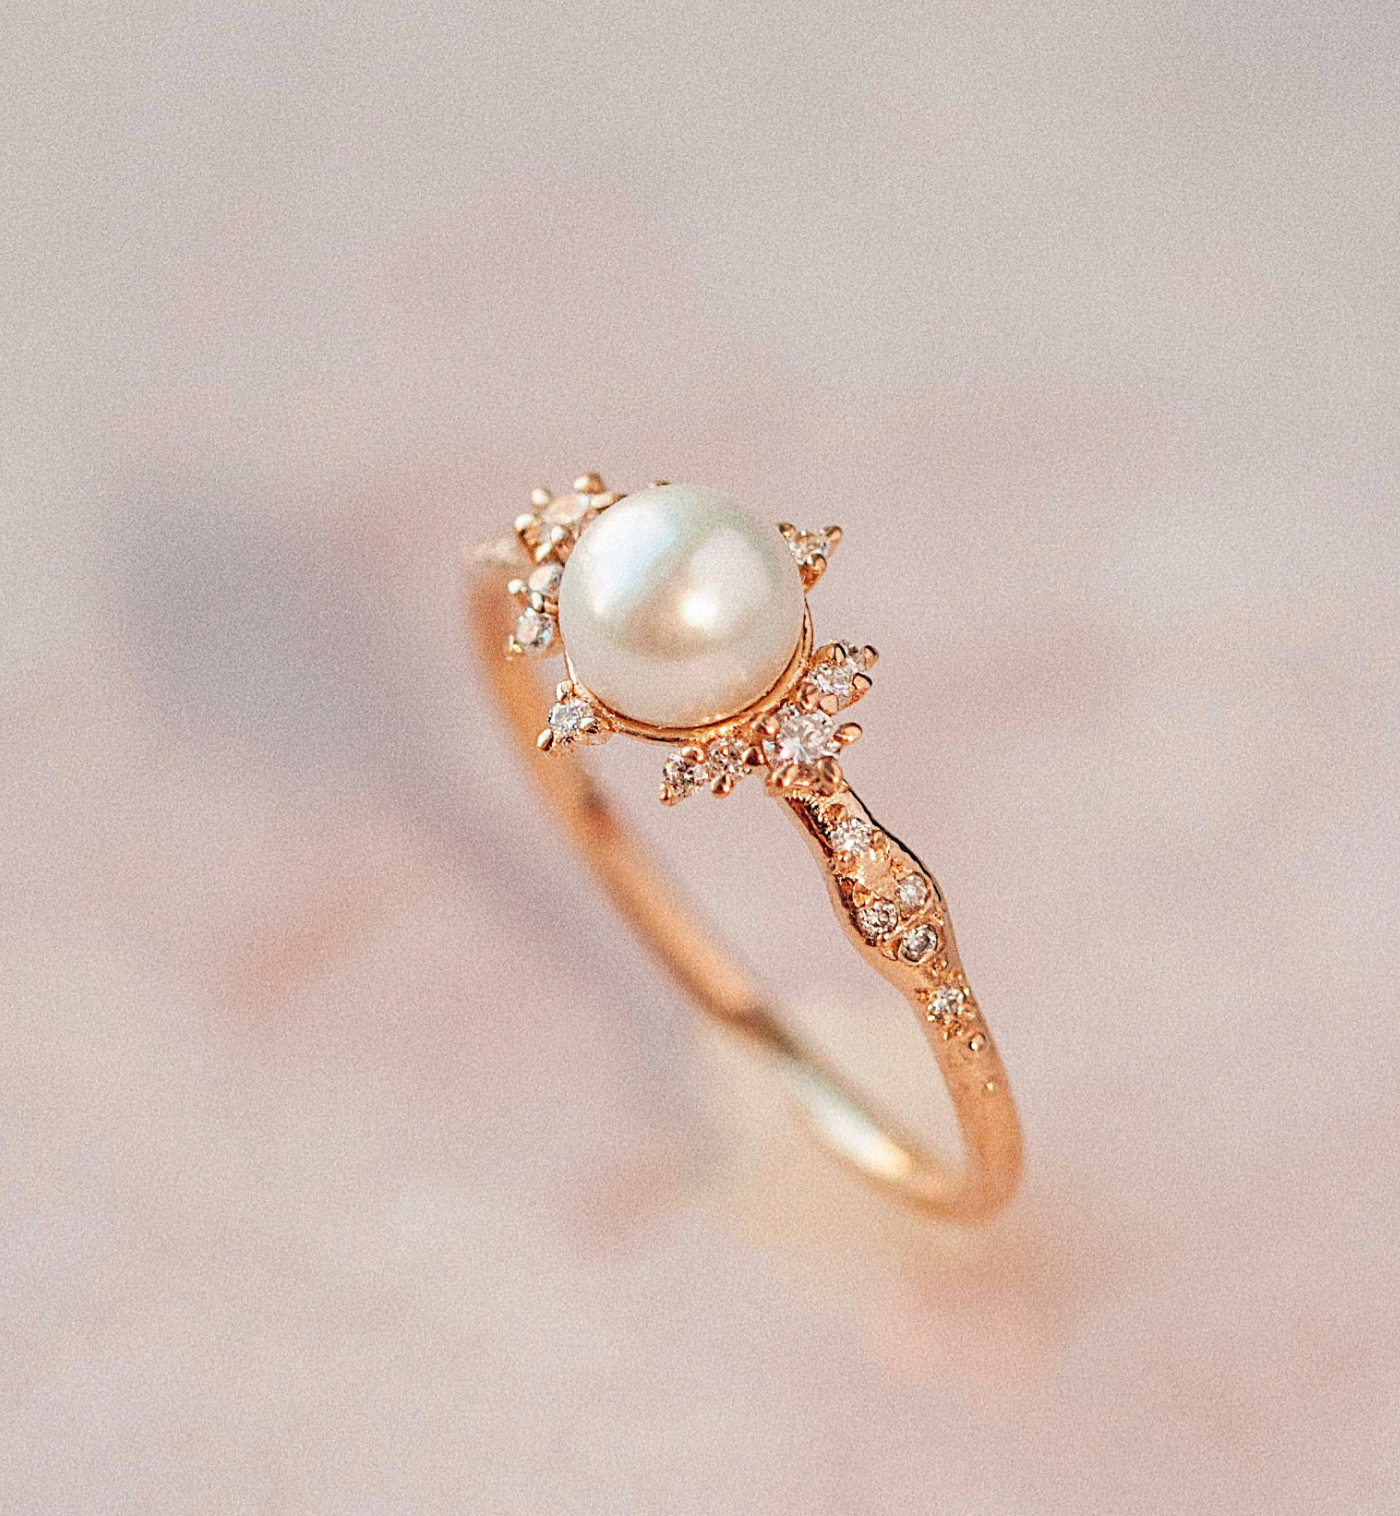 Side view of pearl and diamond ring on light pink background.